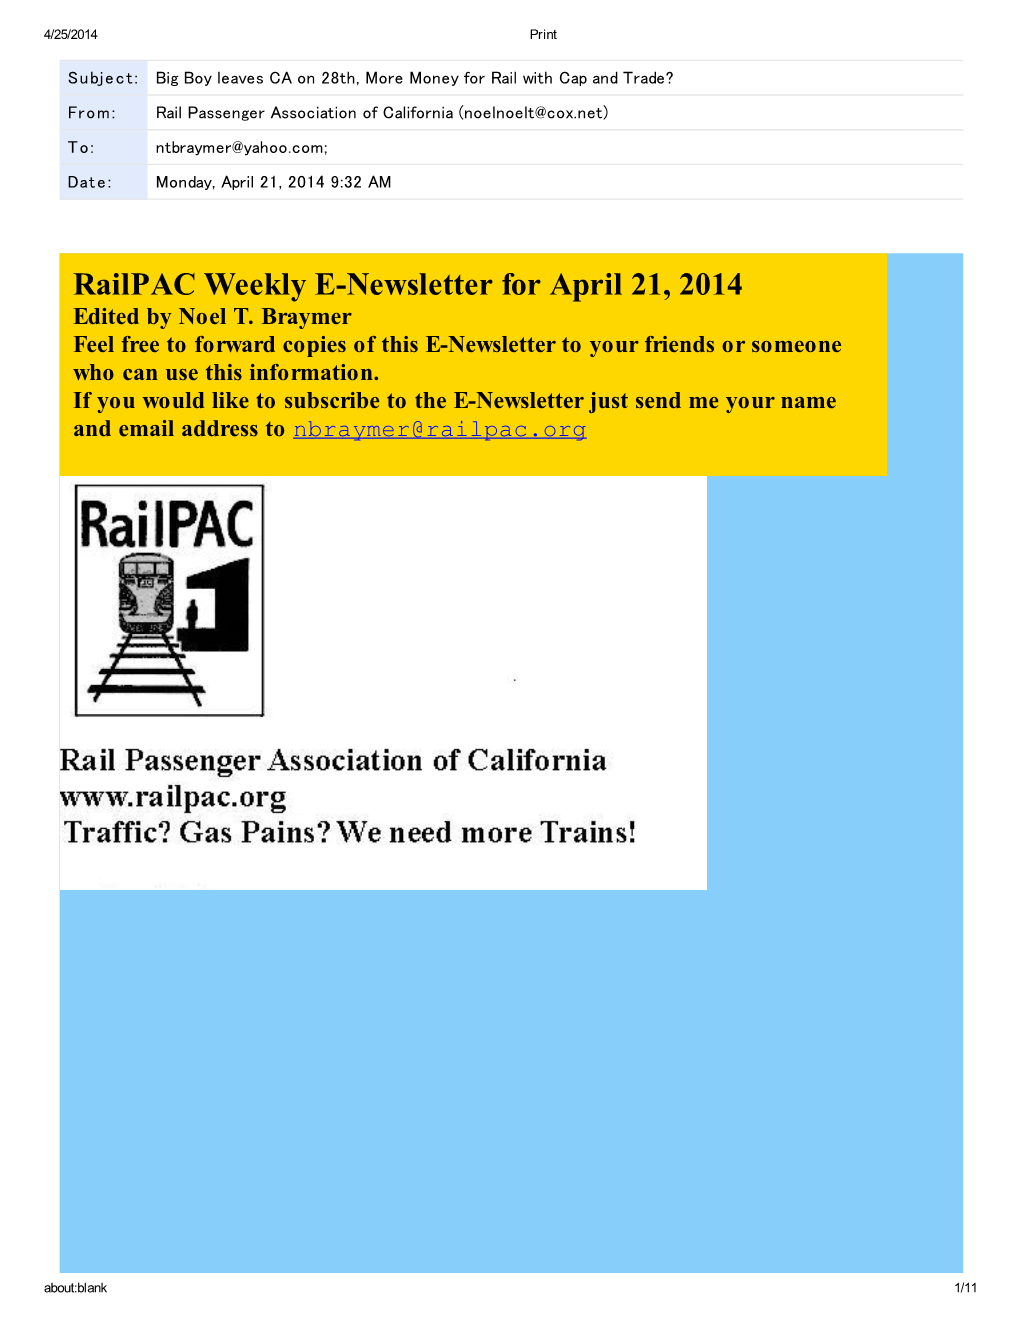 Railpac Weekly E-Newsletter for April 21, 2014 Edited by Noel T